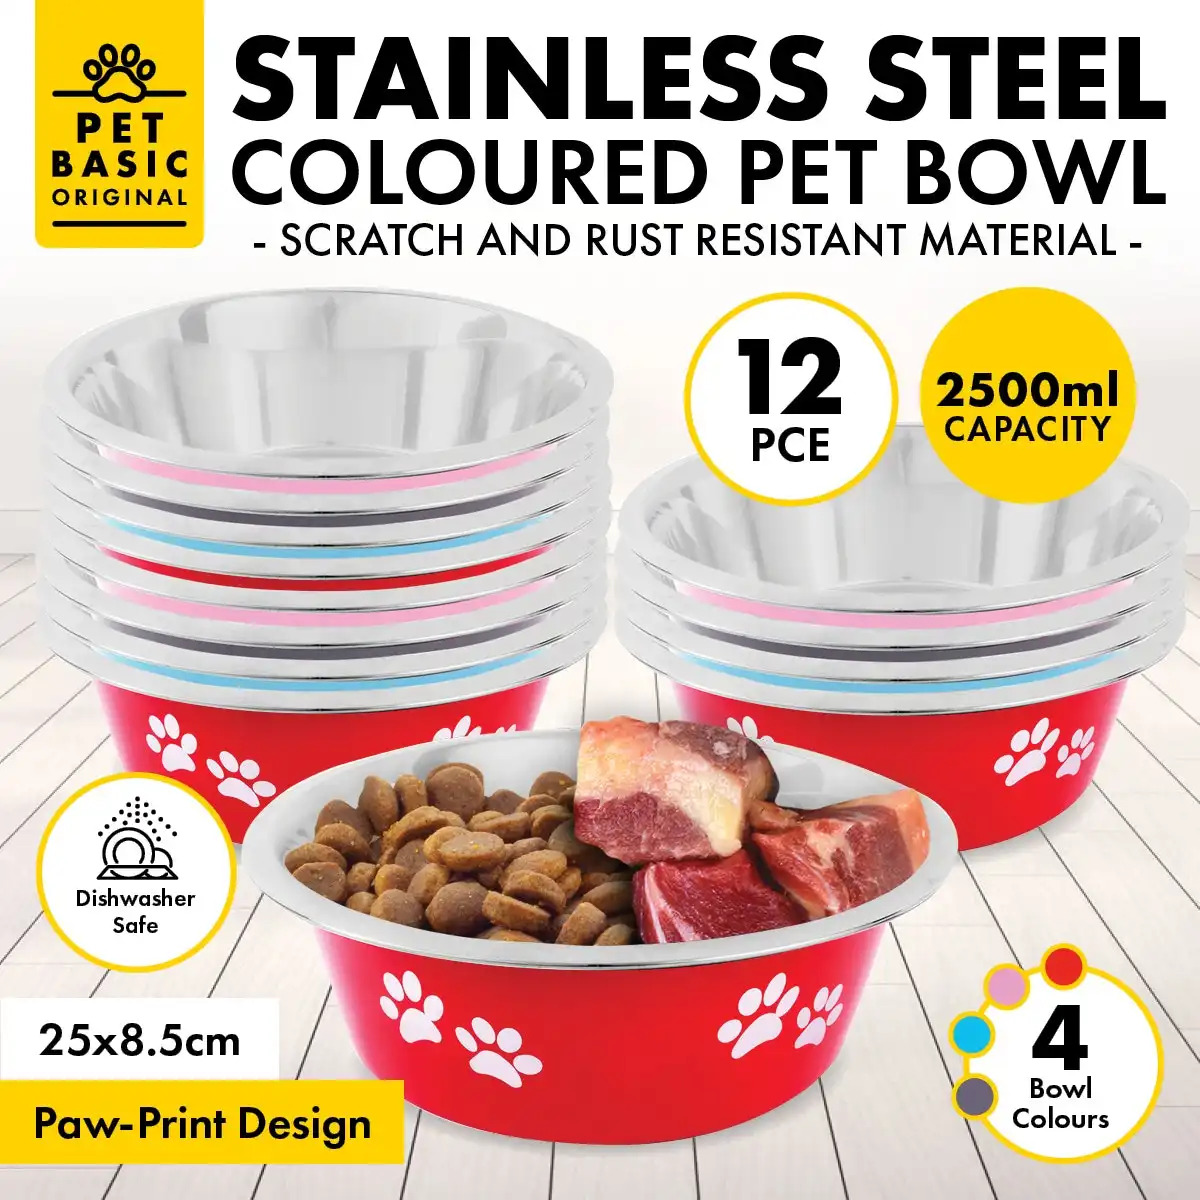 Pet Basic® 12PCE Pet Bowl 25cm Stainless Steel Coloured With Paw Prints 2500ml